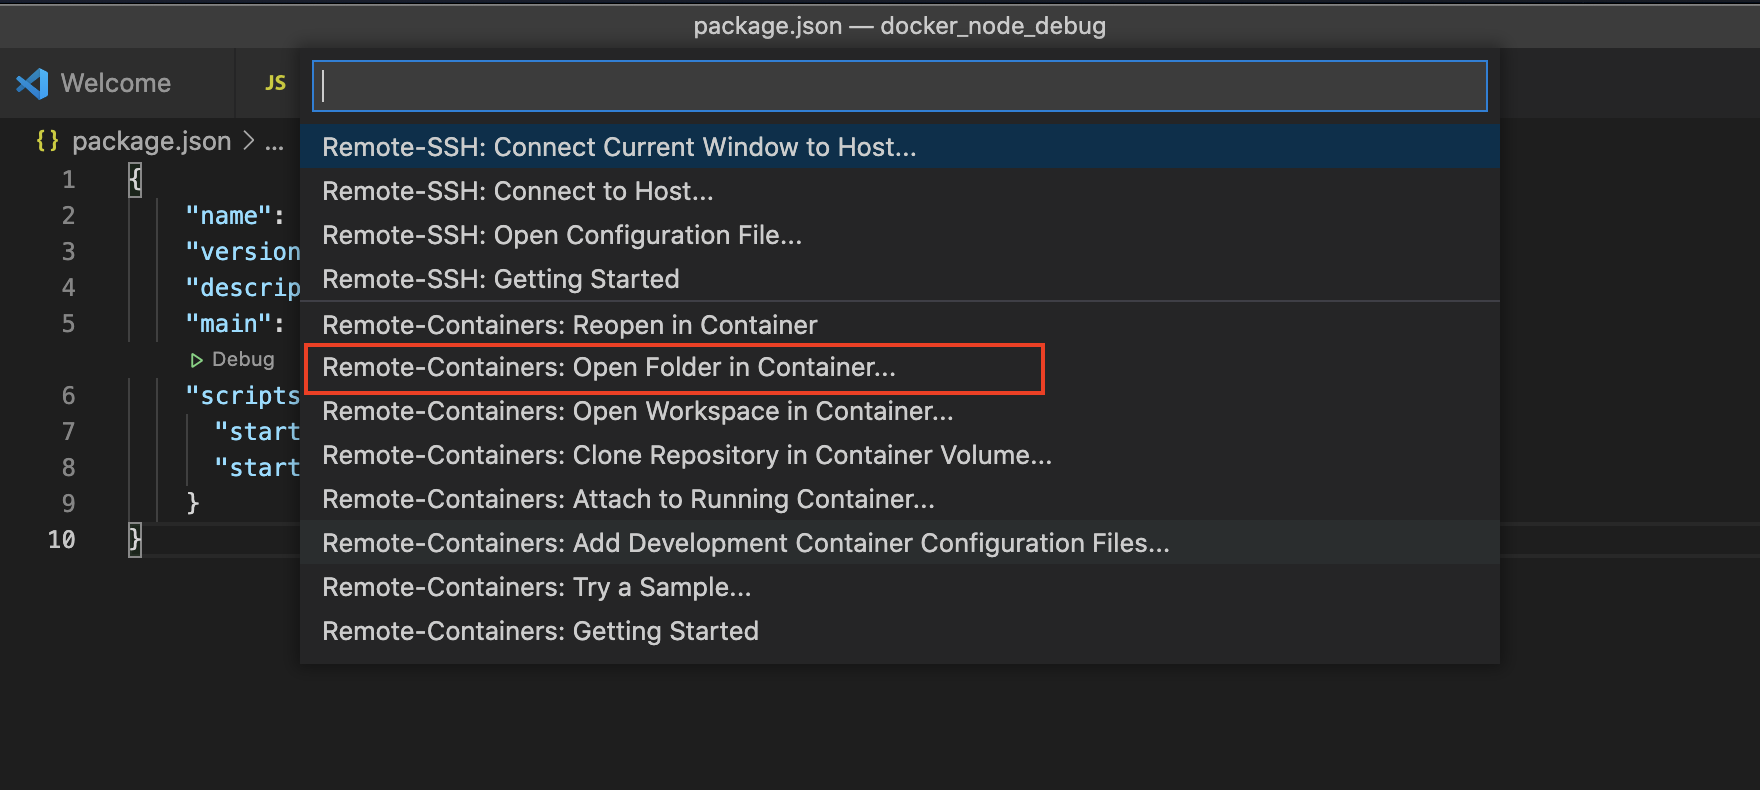 Remote-Containers: Open Folder in Container...